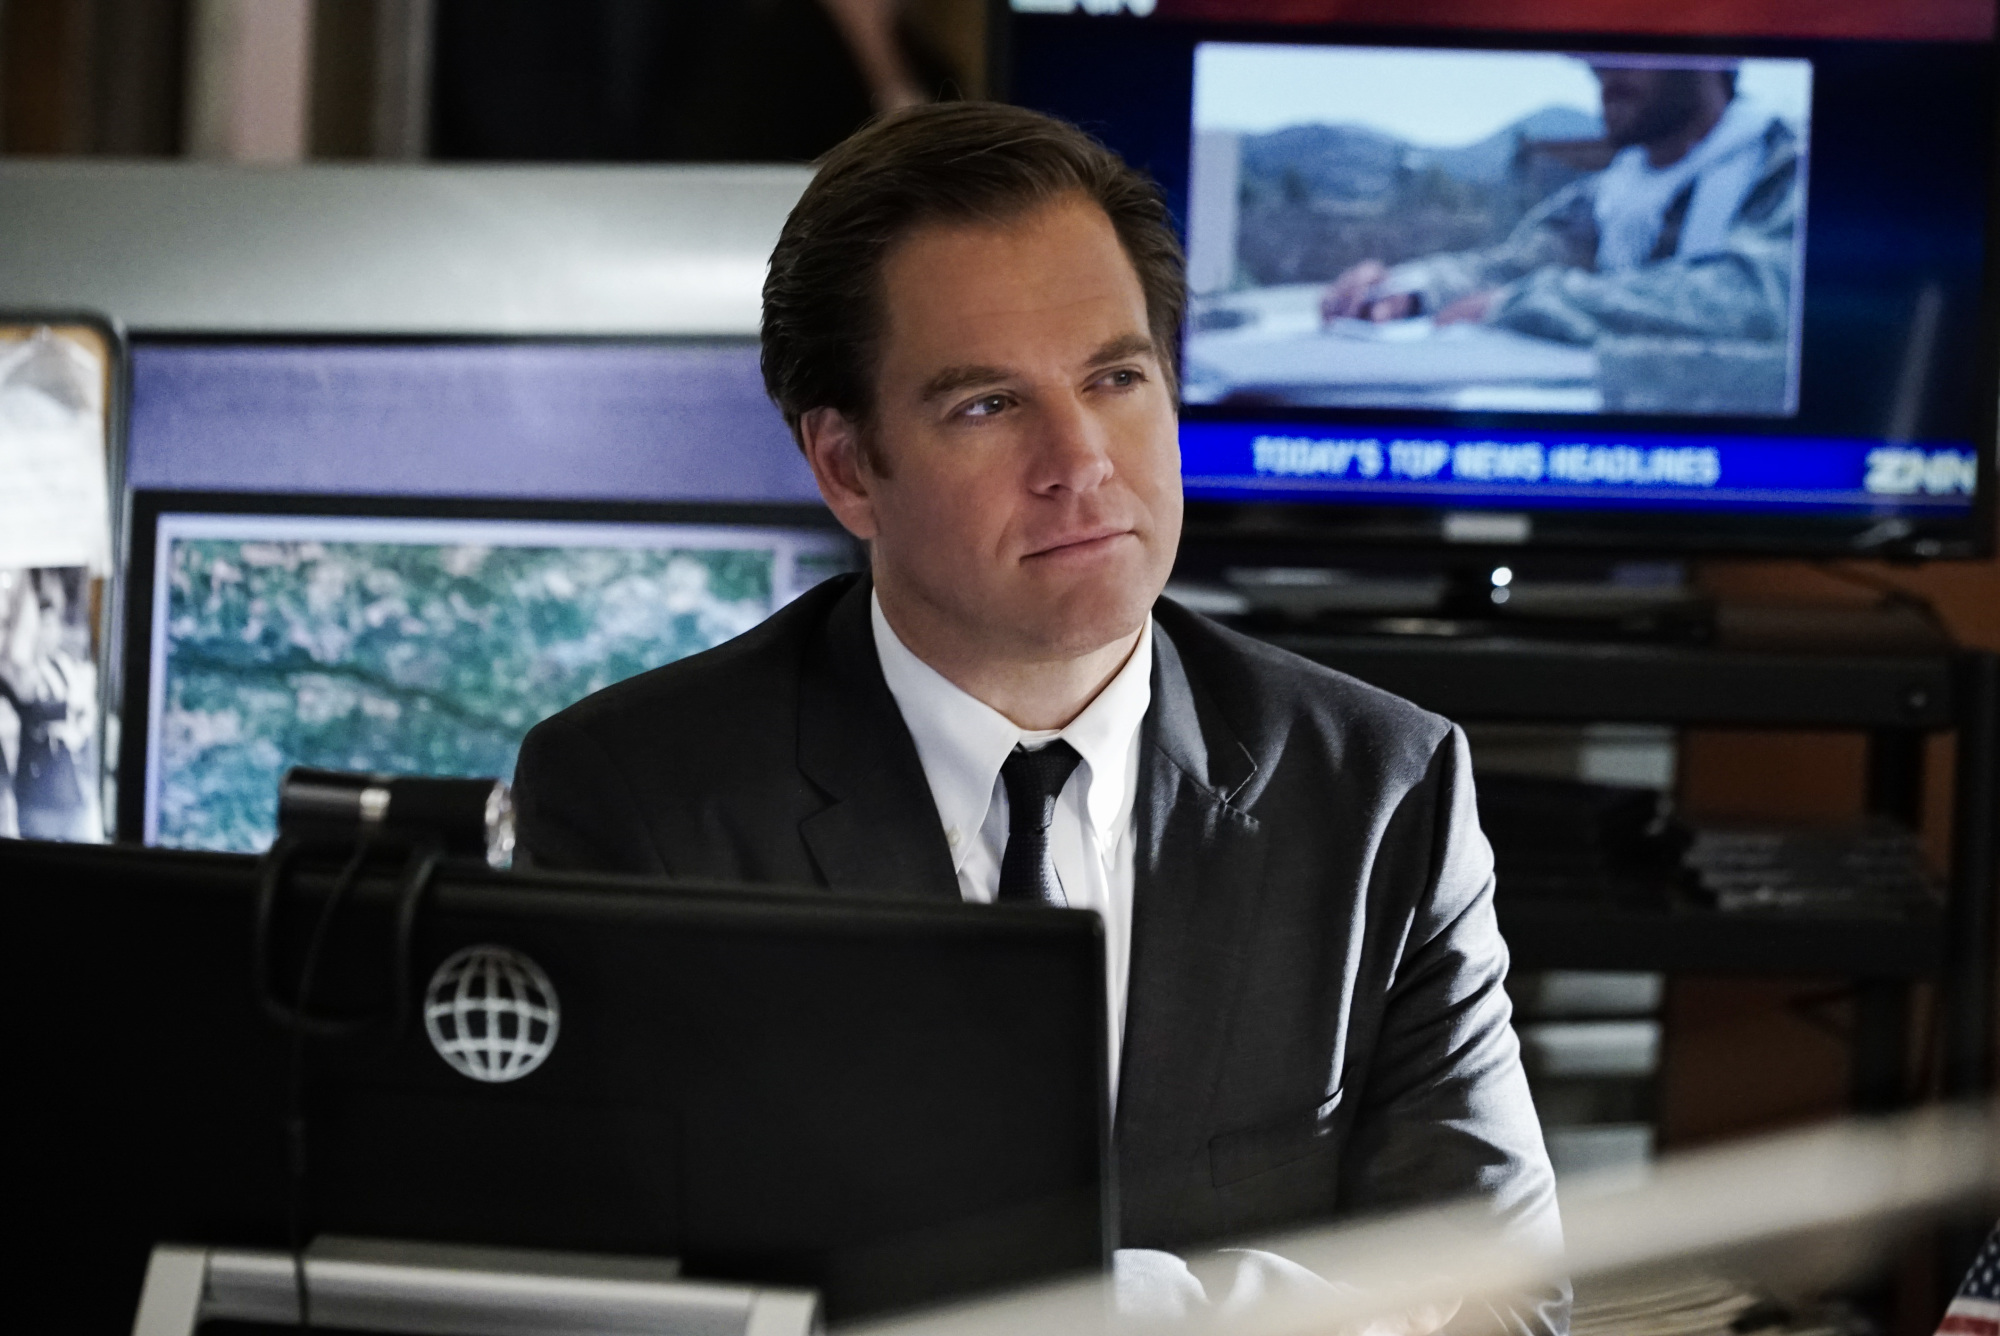 Michael Weatherly as Tony DiNozzo on NCIS | Jace Downs/CBS via Getty Images